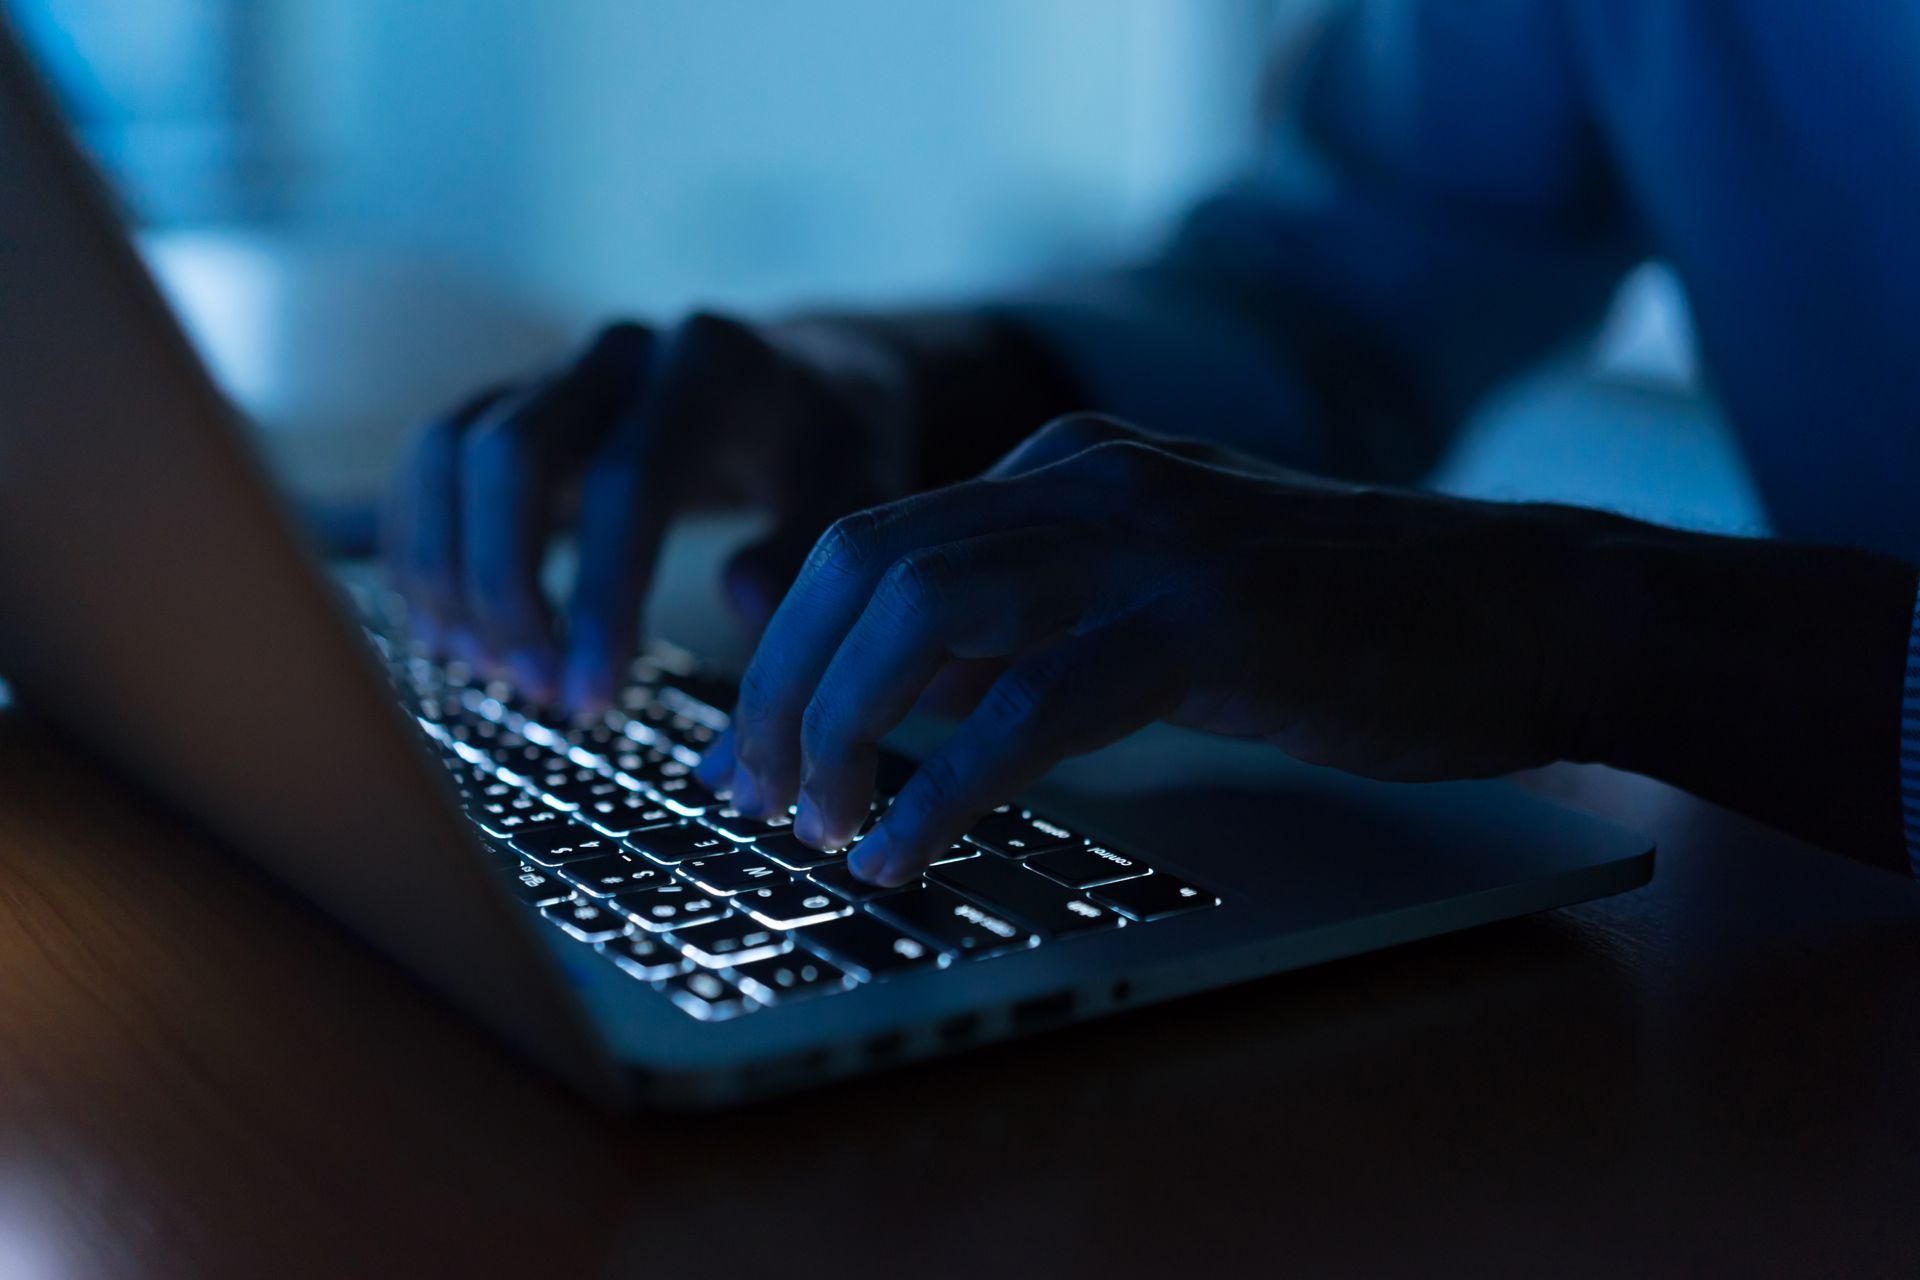 A person typing on a laptop. Dark lighting.